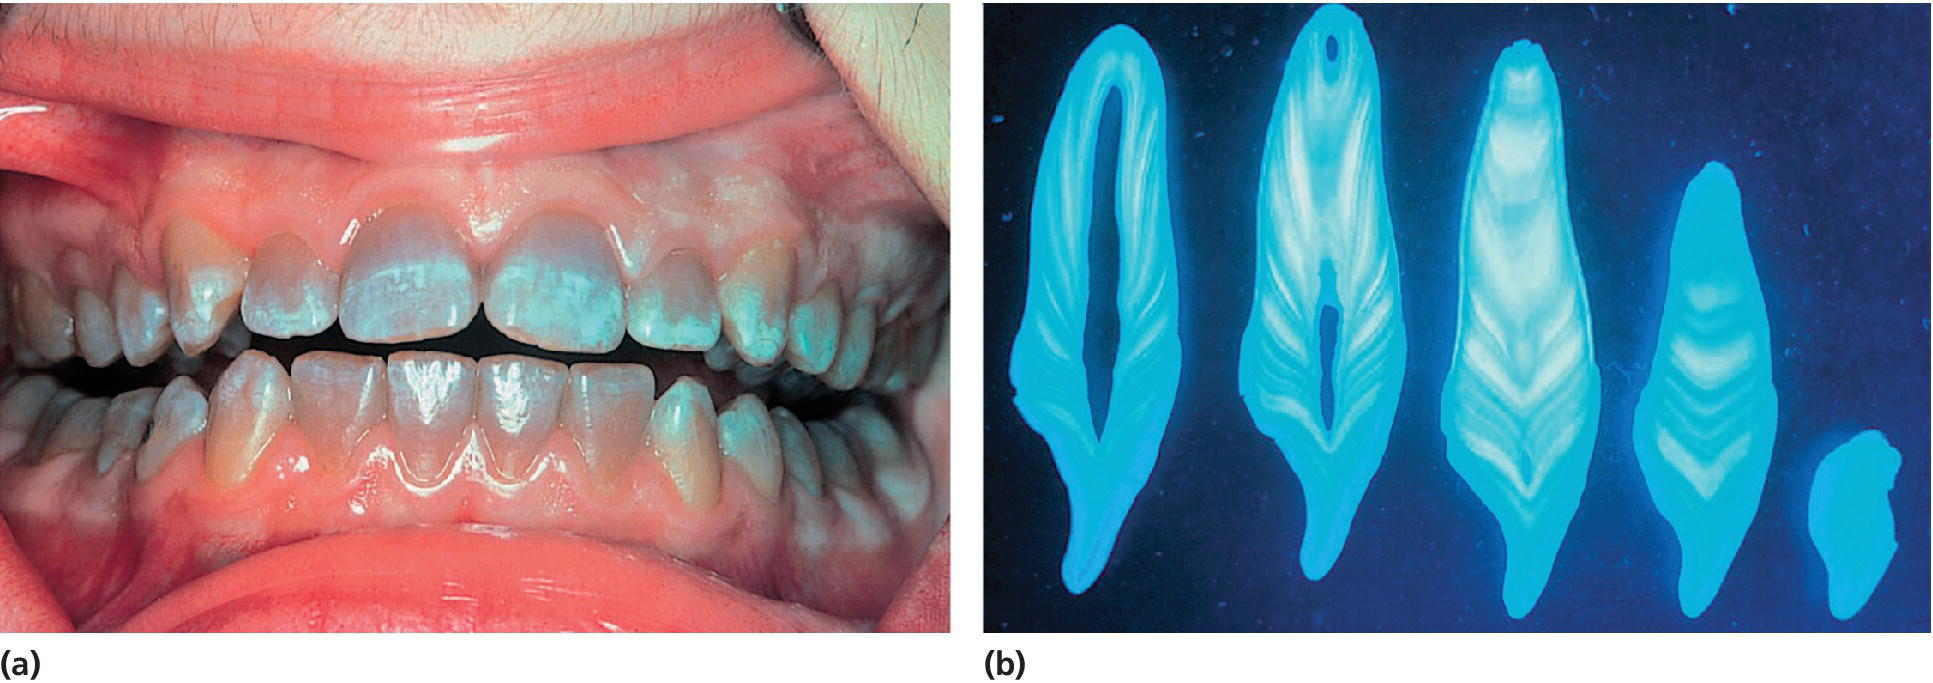 2 Photos of teeth of a 14-year-old girl exhibiting tetracycline stains (left) and a screen capture of histologic sections of tooth illustrating bands of tetracycline staining (right).